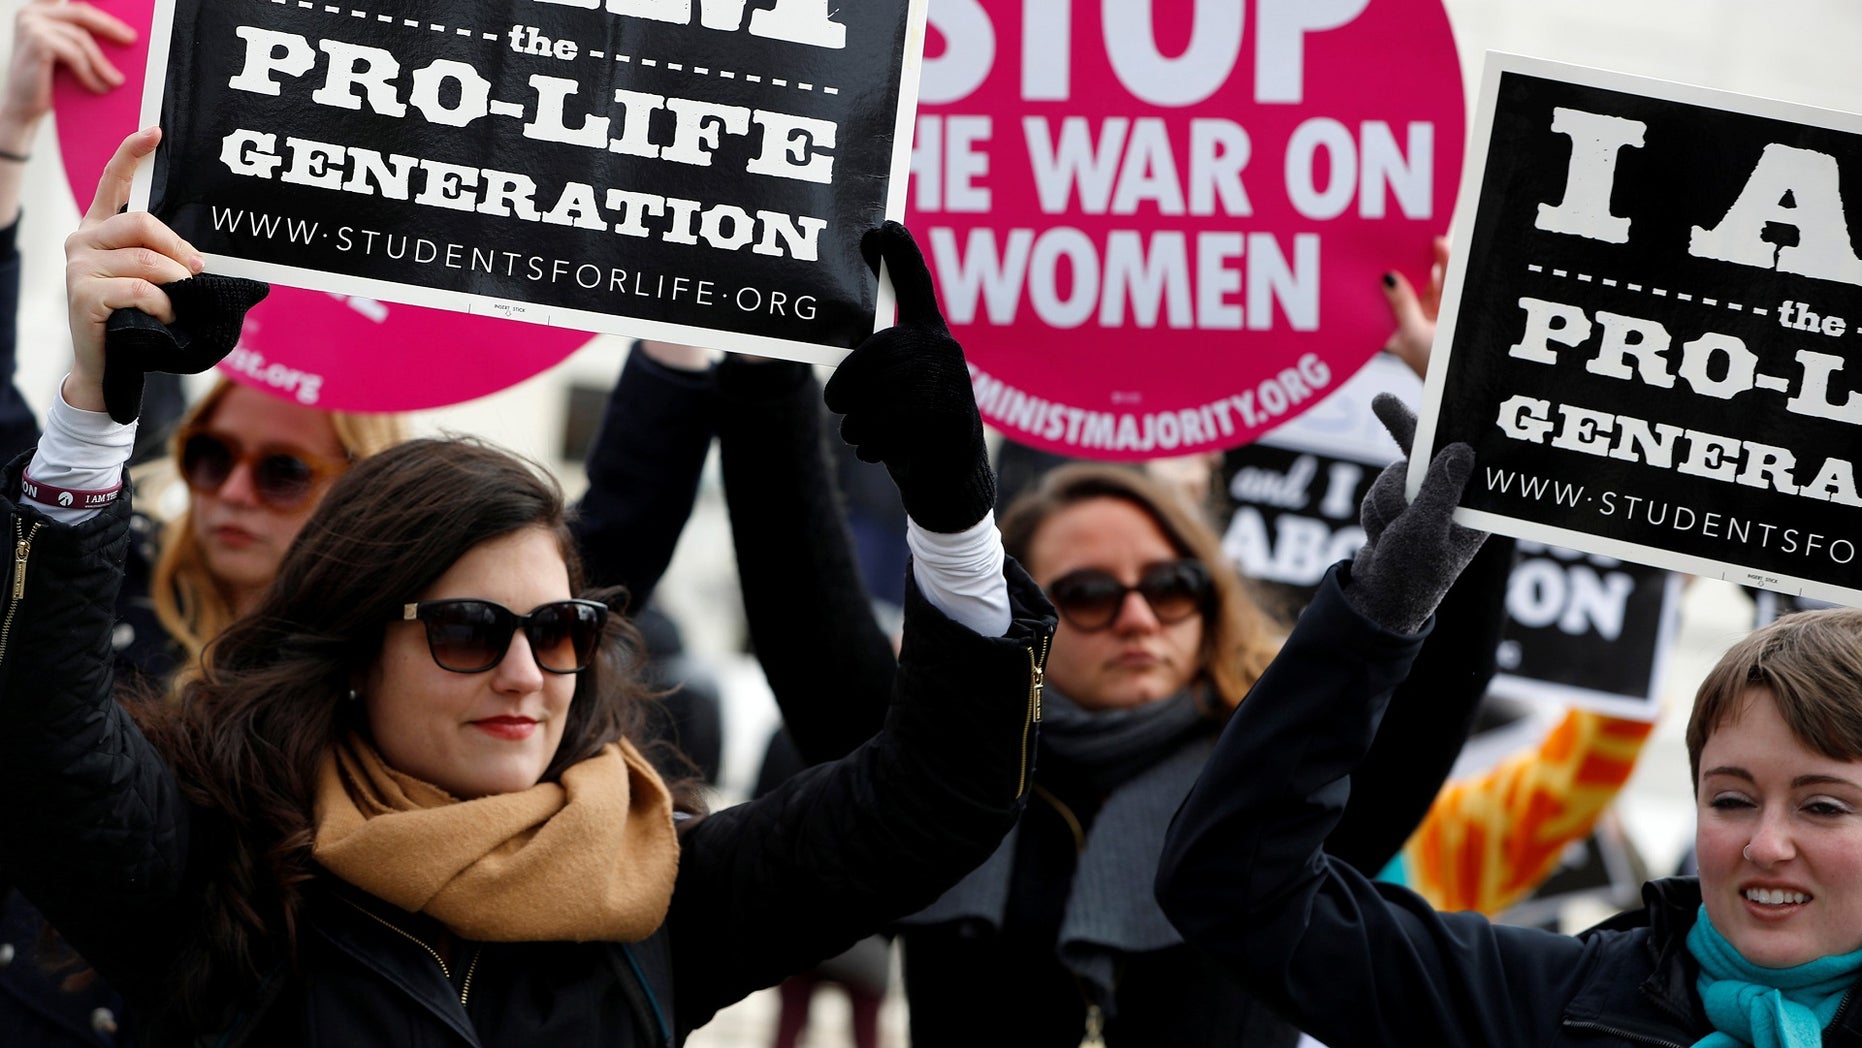 I leave the March for Life happier than when I came every year – Here